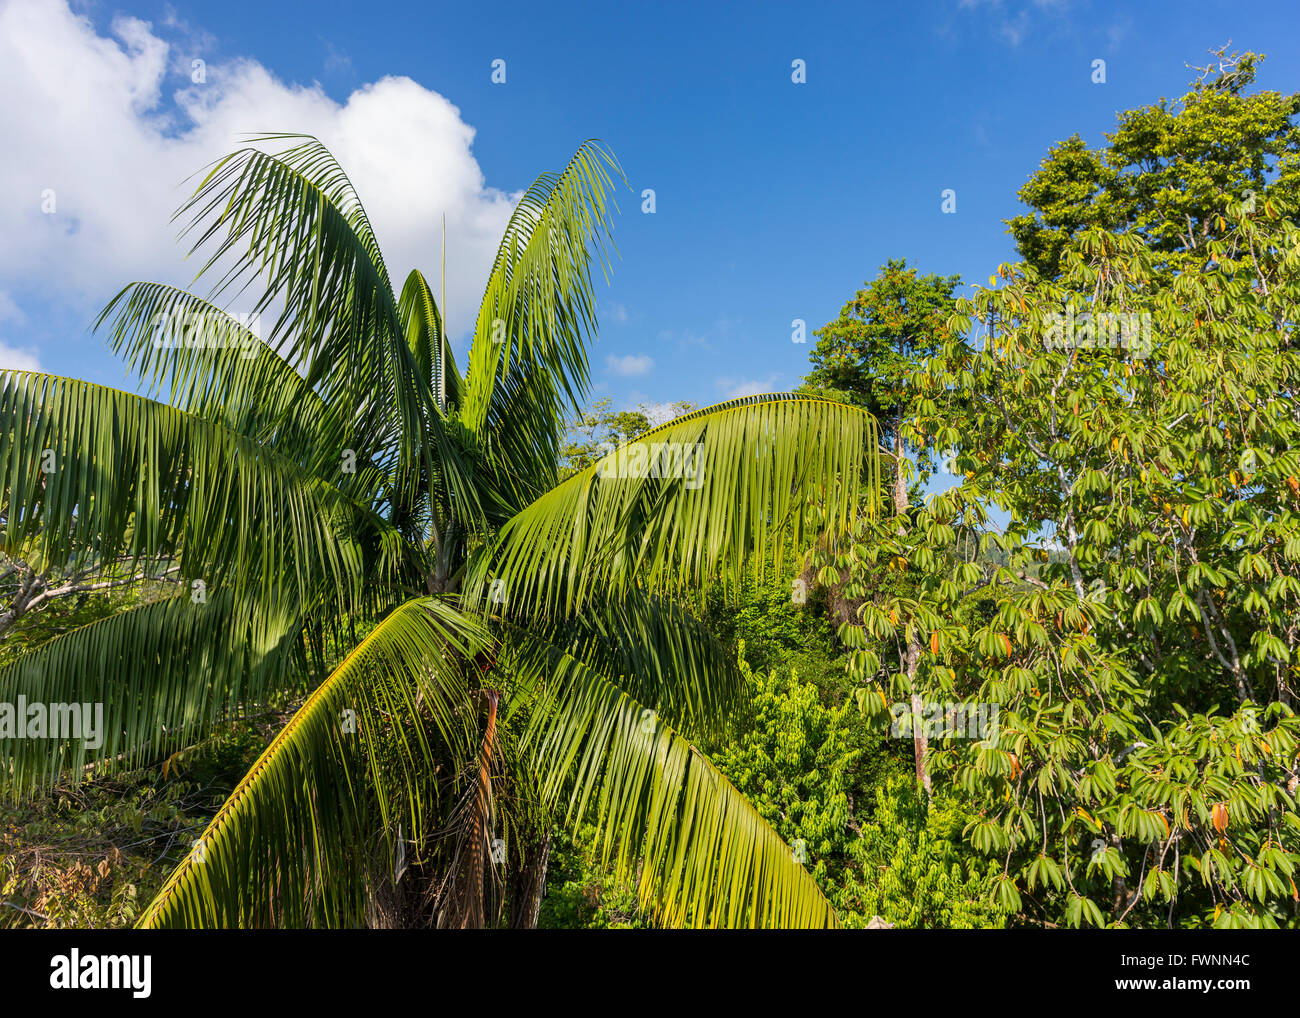 OSA PENINSULA, COSTA RICA - Trees and blue sky in rain forest. Stock Photo